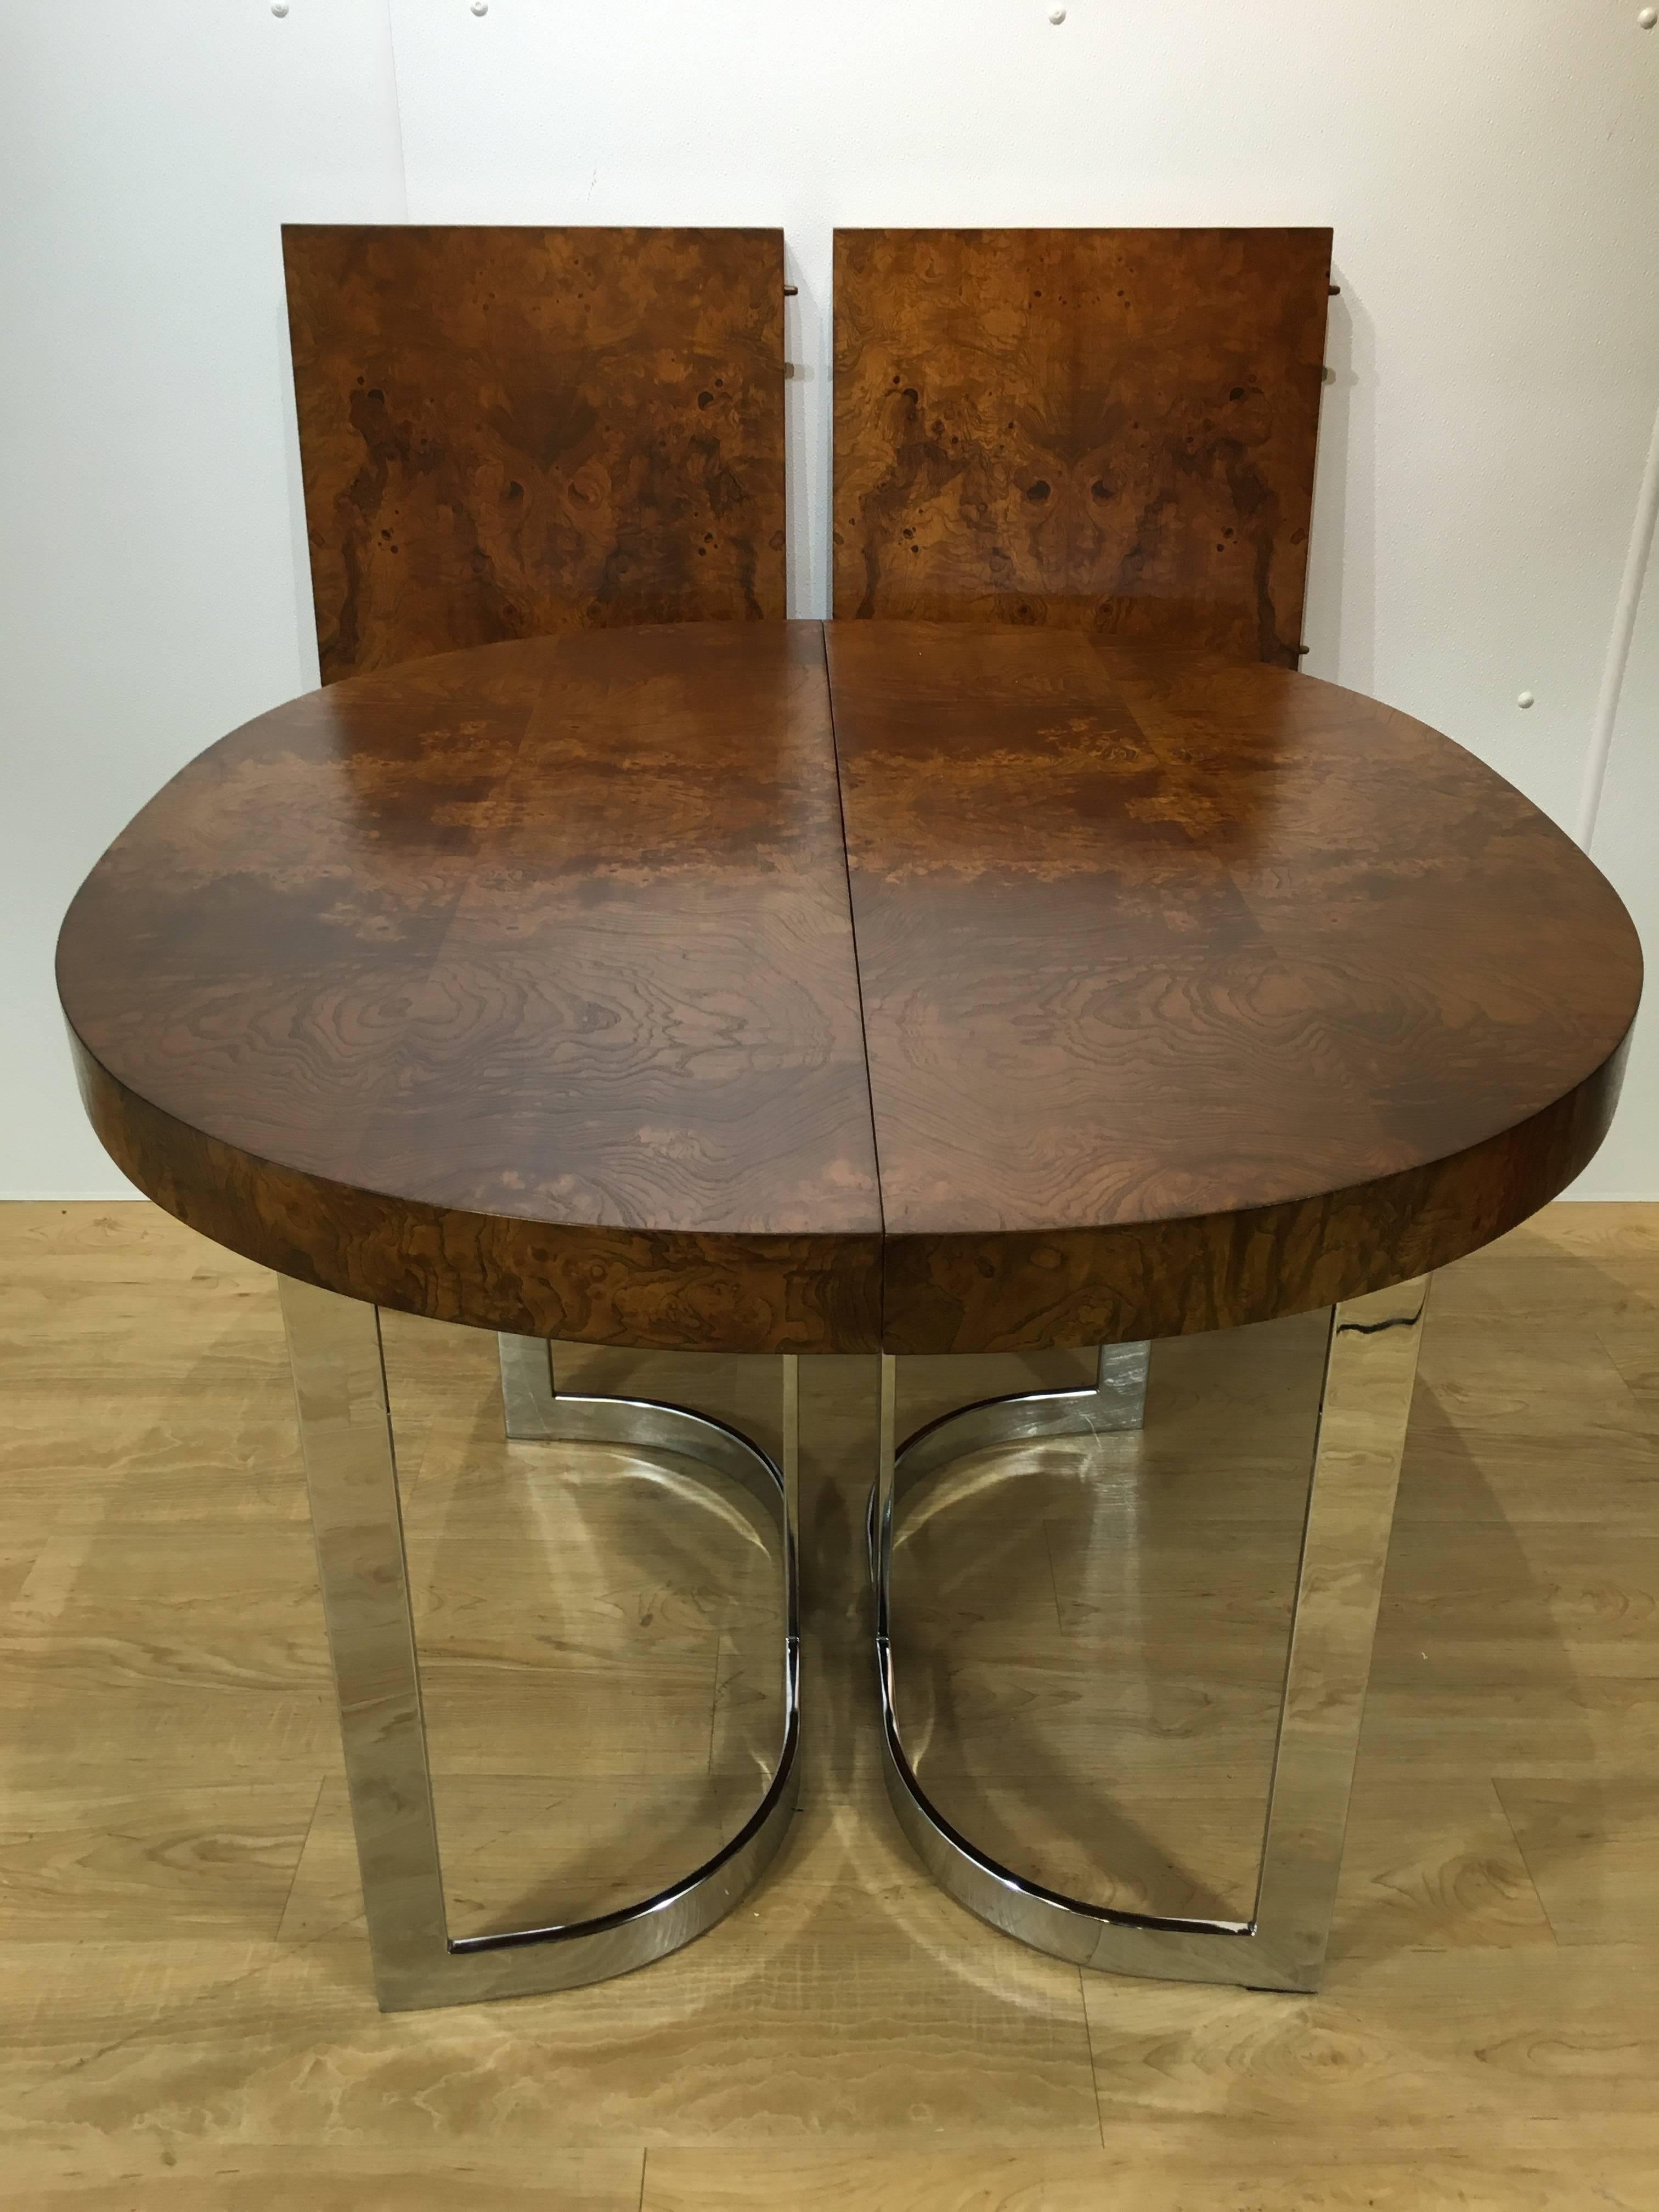 Stunning Milo Baughman burl wood dining table with chrome base. Wonderful grain to top and clean, bright chrome base. Measures: The table includes two boards measuring 18